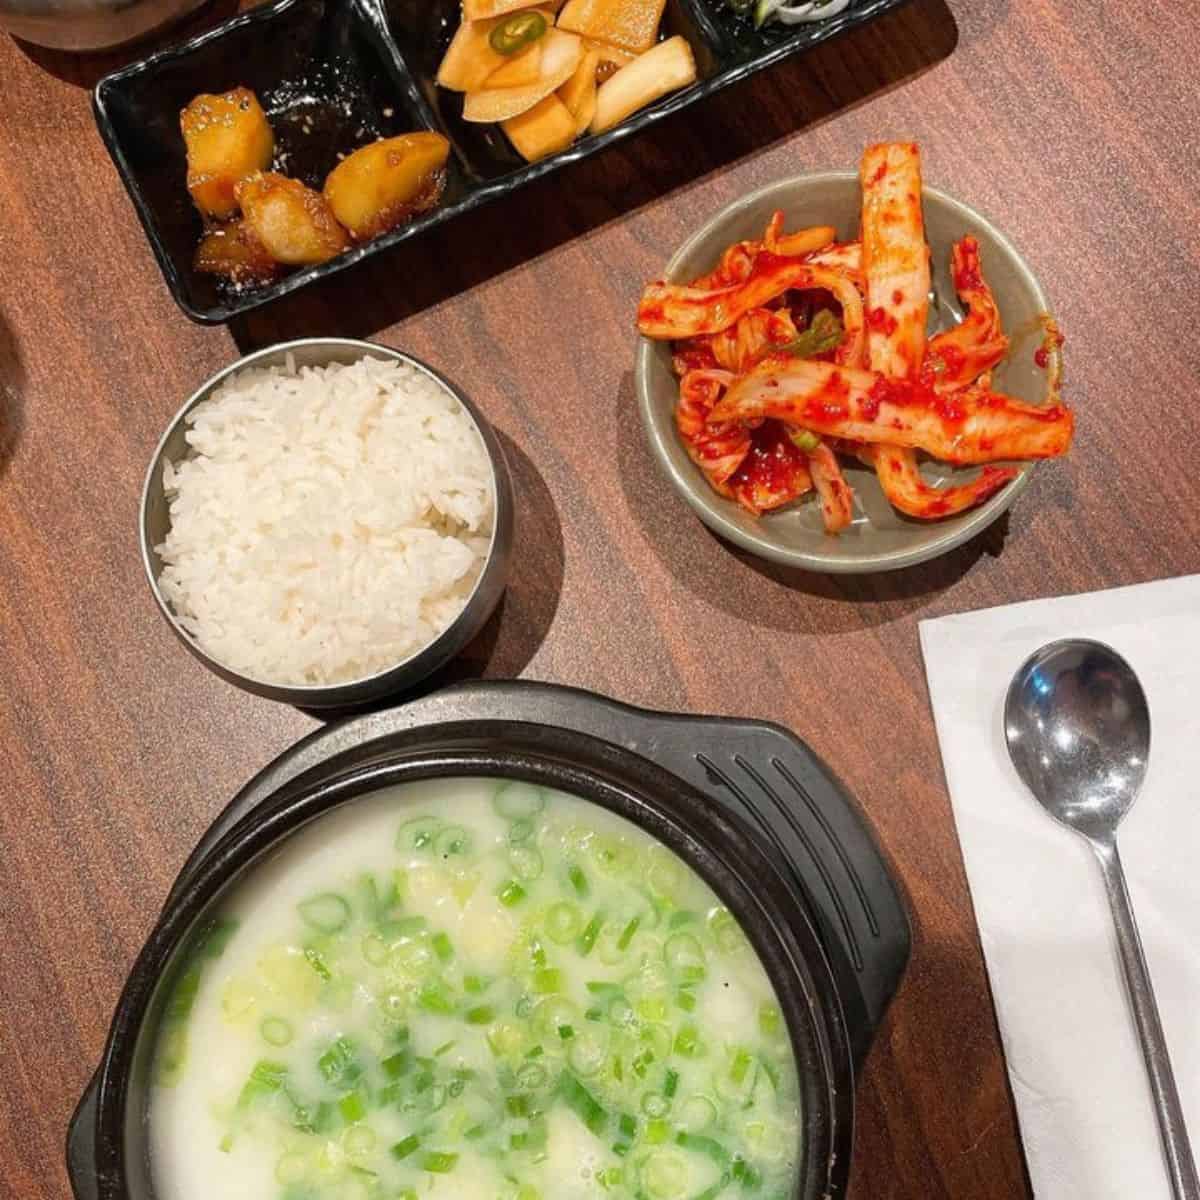 Yummy Seolleongtang with rice, kimchi and other Korean side dishes